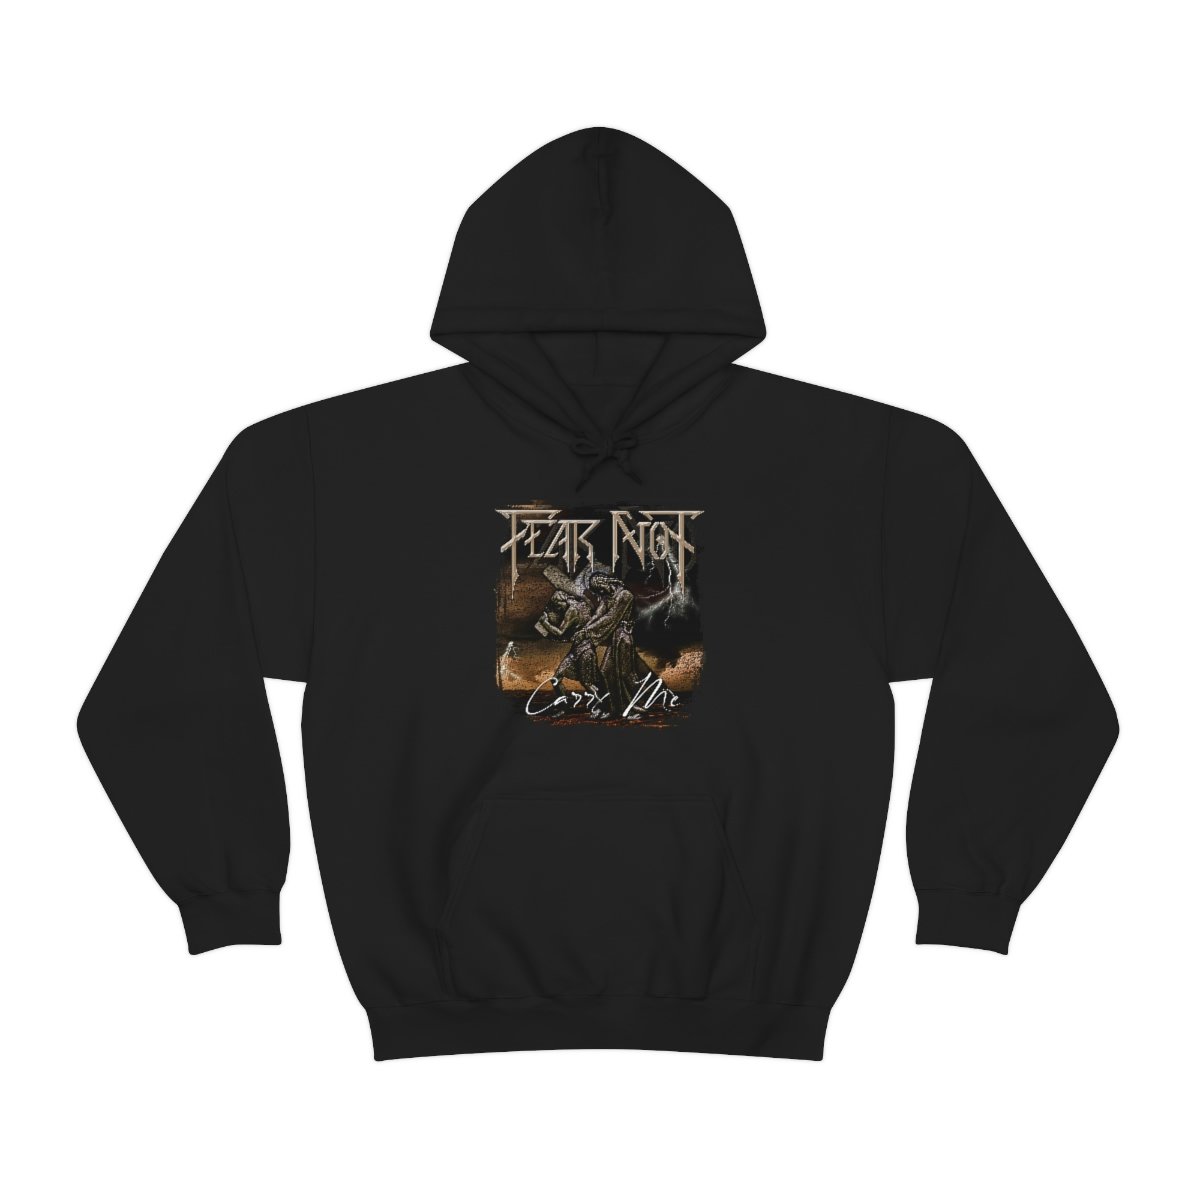 Fear Not – Carry Me Pullover Hooded Sweatshirt